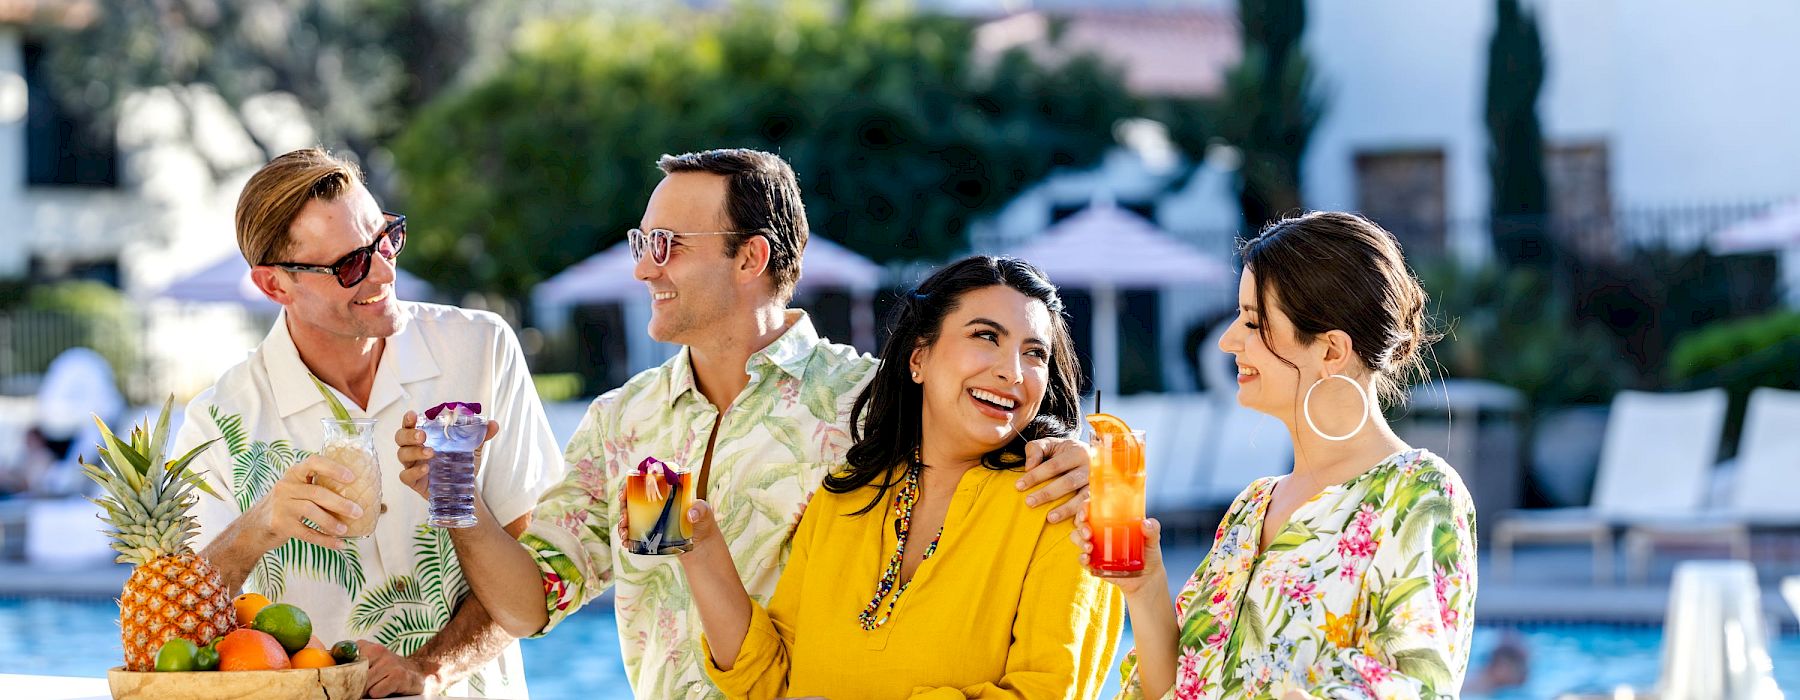 Four people are enjoying drinks by the poolside bar, surrounded by bottles and fresh fruit, with a scenic background of trees and mountains.